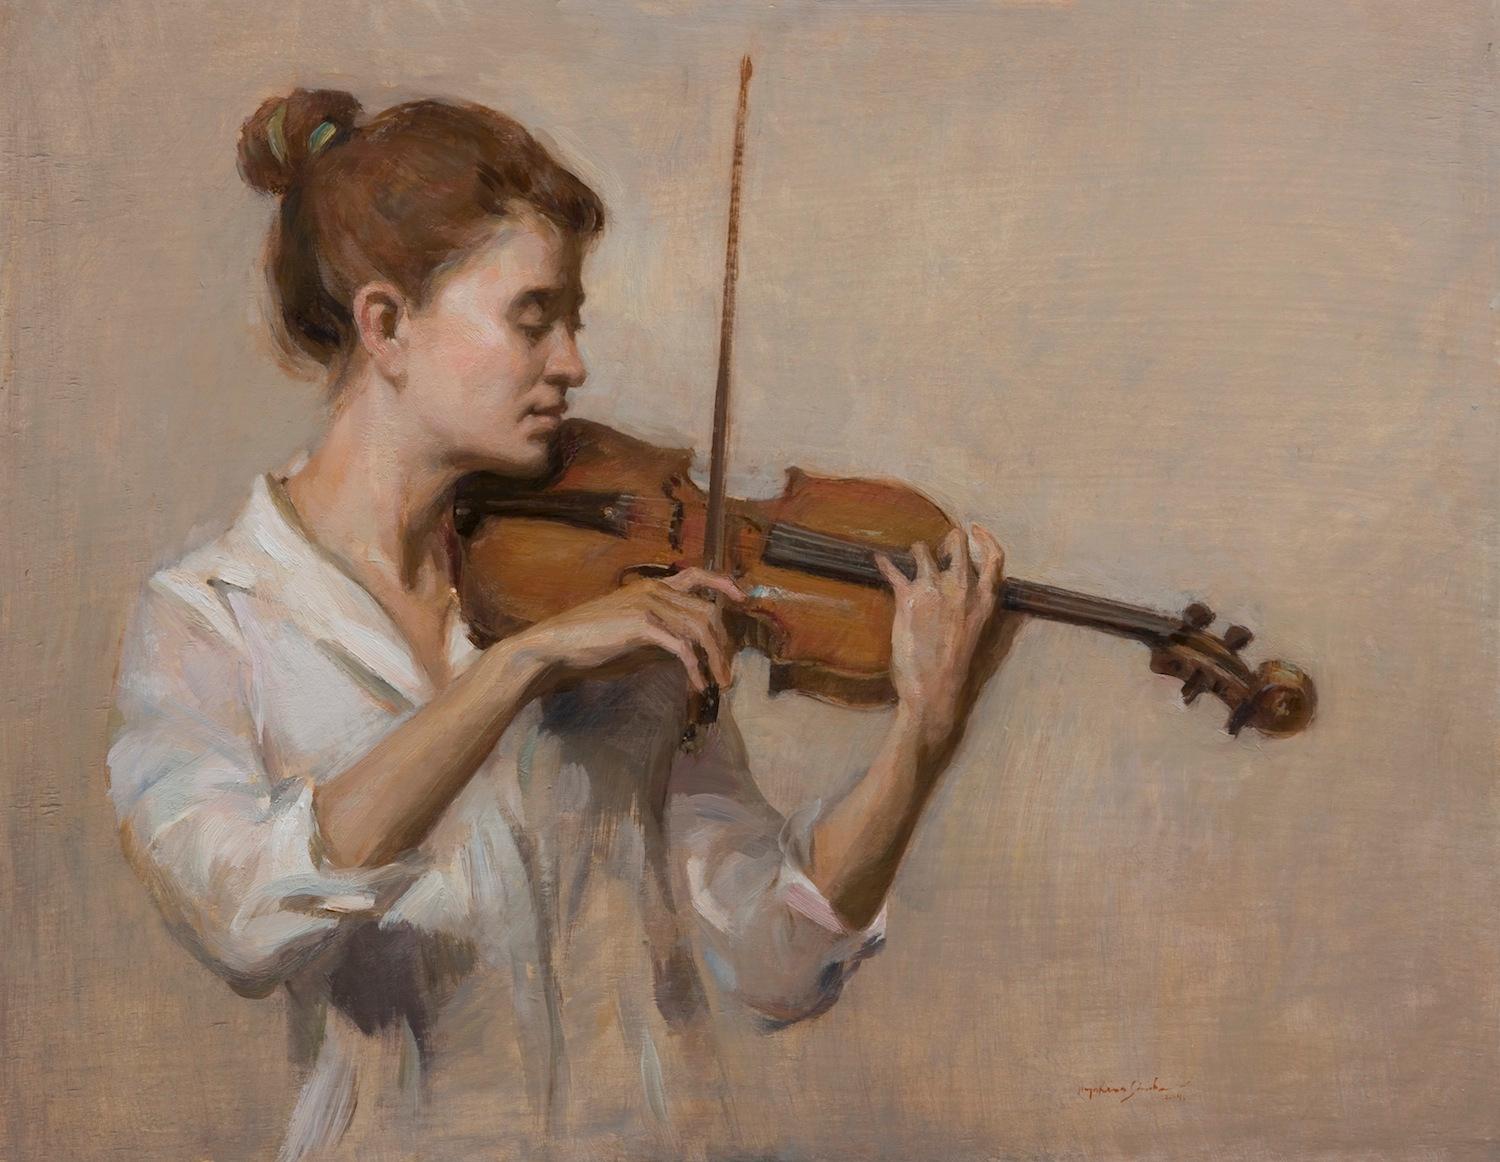 Angel Ramiro Sanchez Figurative Painting - Cadenza , Figurative, Oil on Panel, Style of Classical Realism. Florence Academy